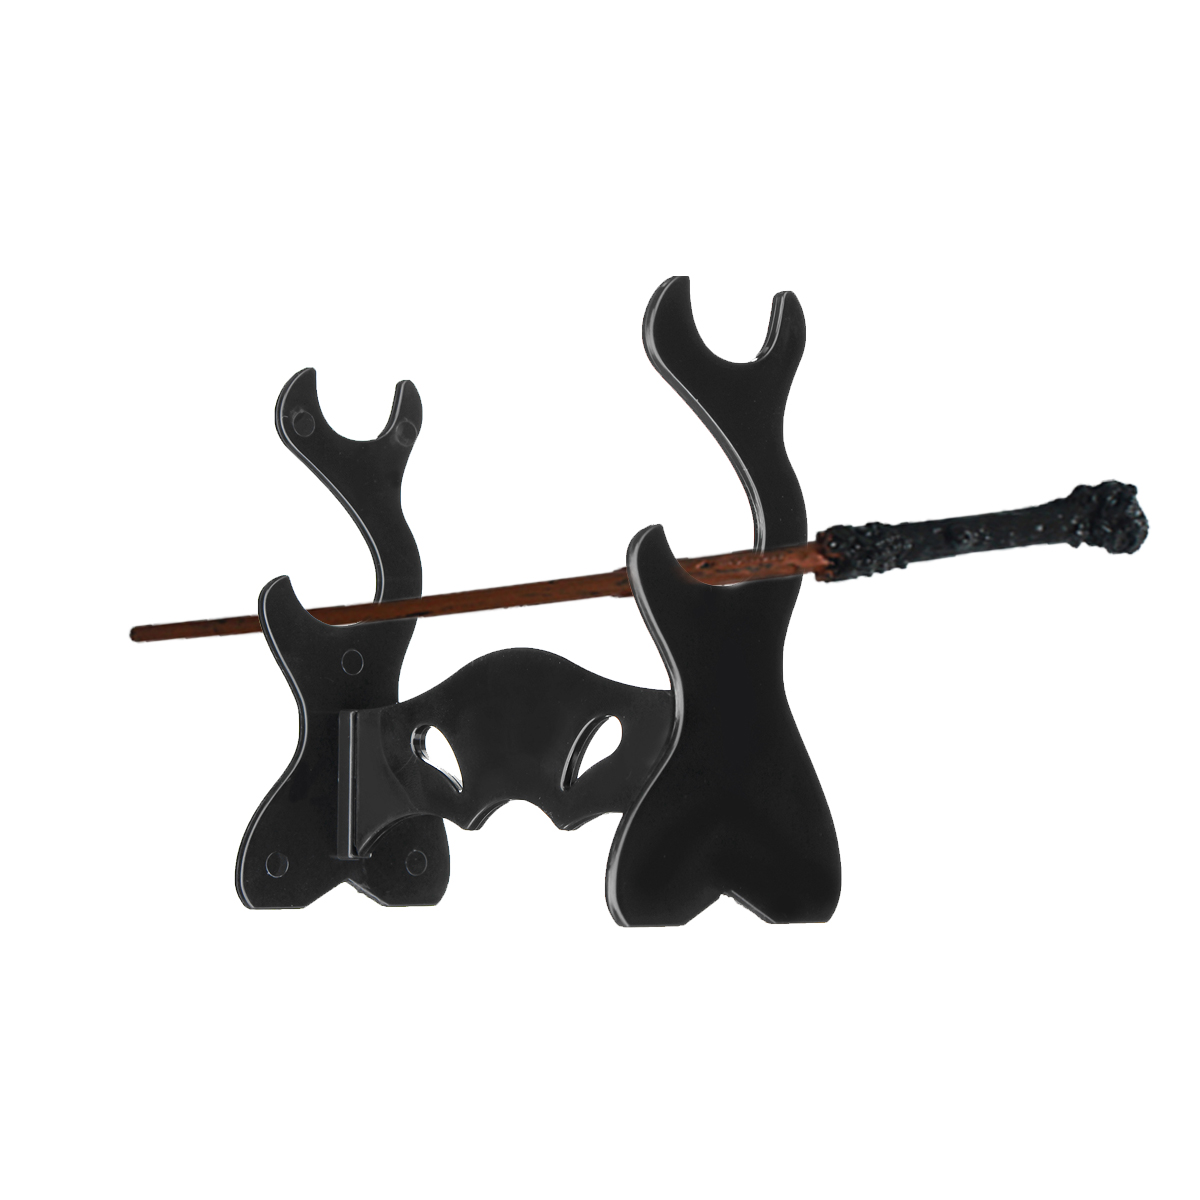 Black-Acrylic-Wizarding-Wand-Twig-Display-Stand-Tool-Holder-for-Wizard-1633380-7